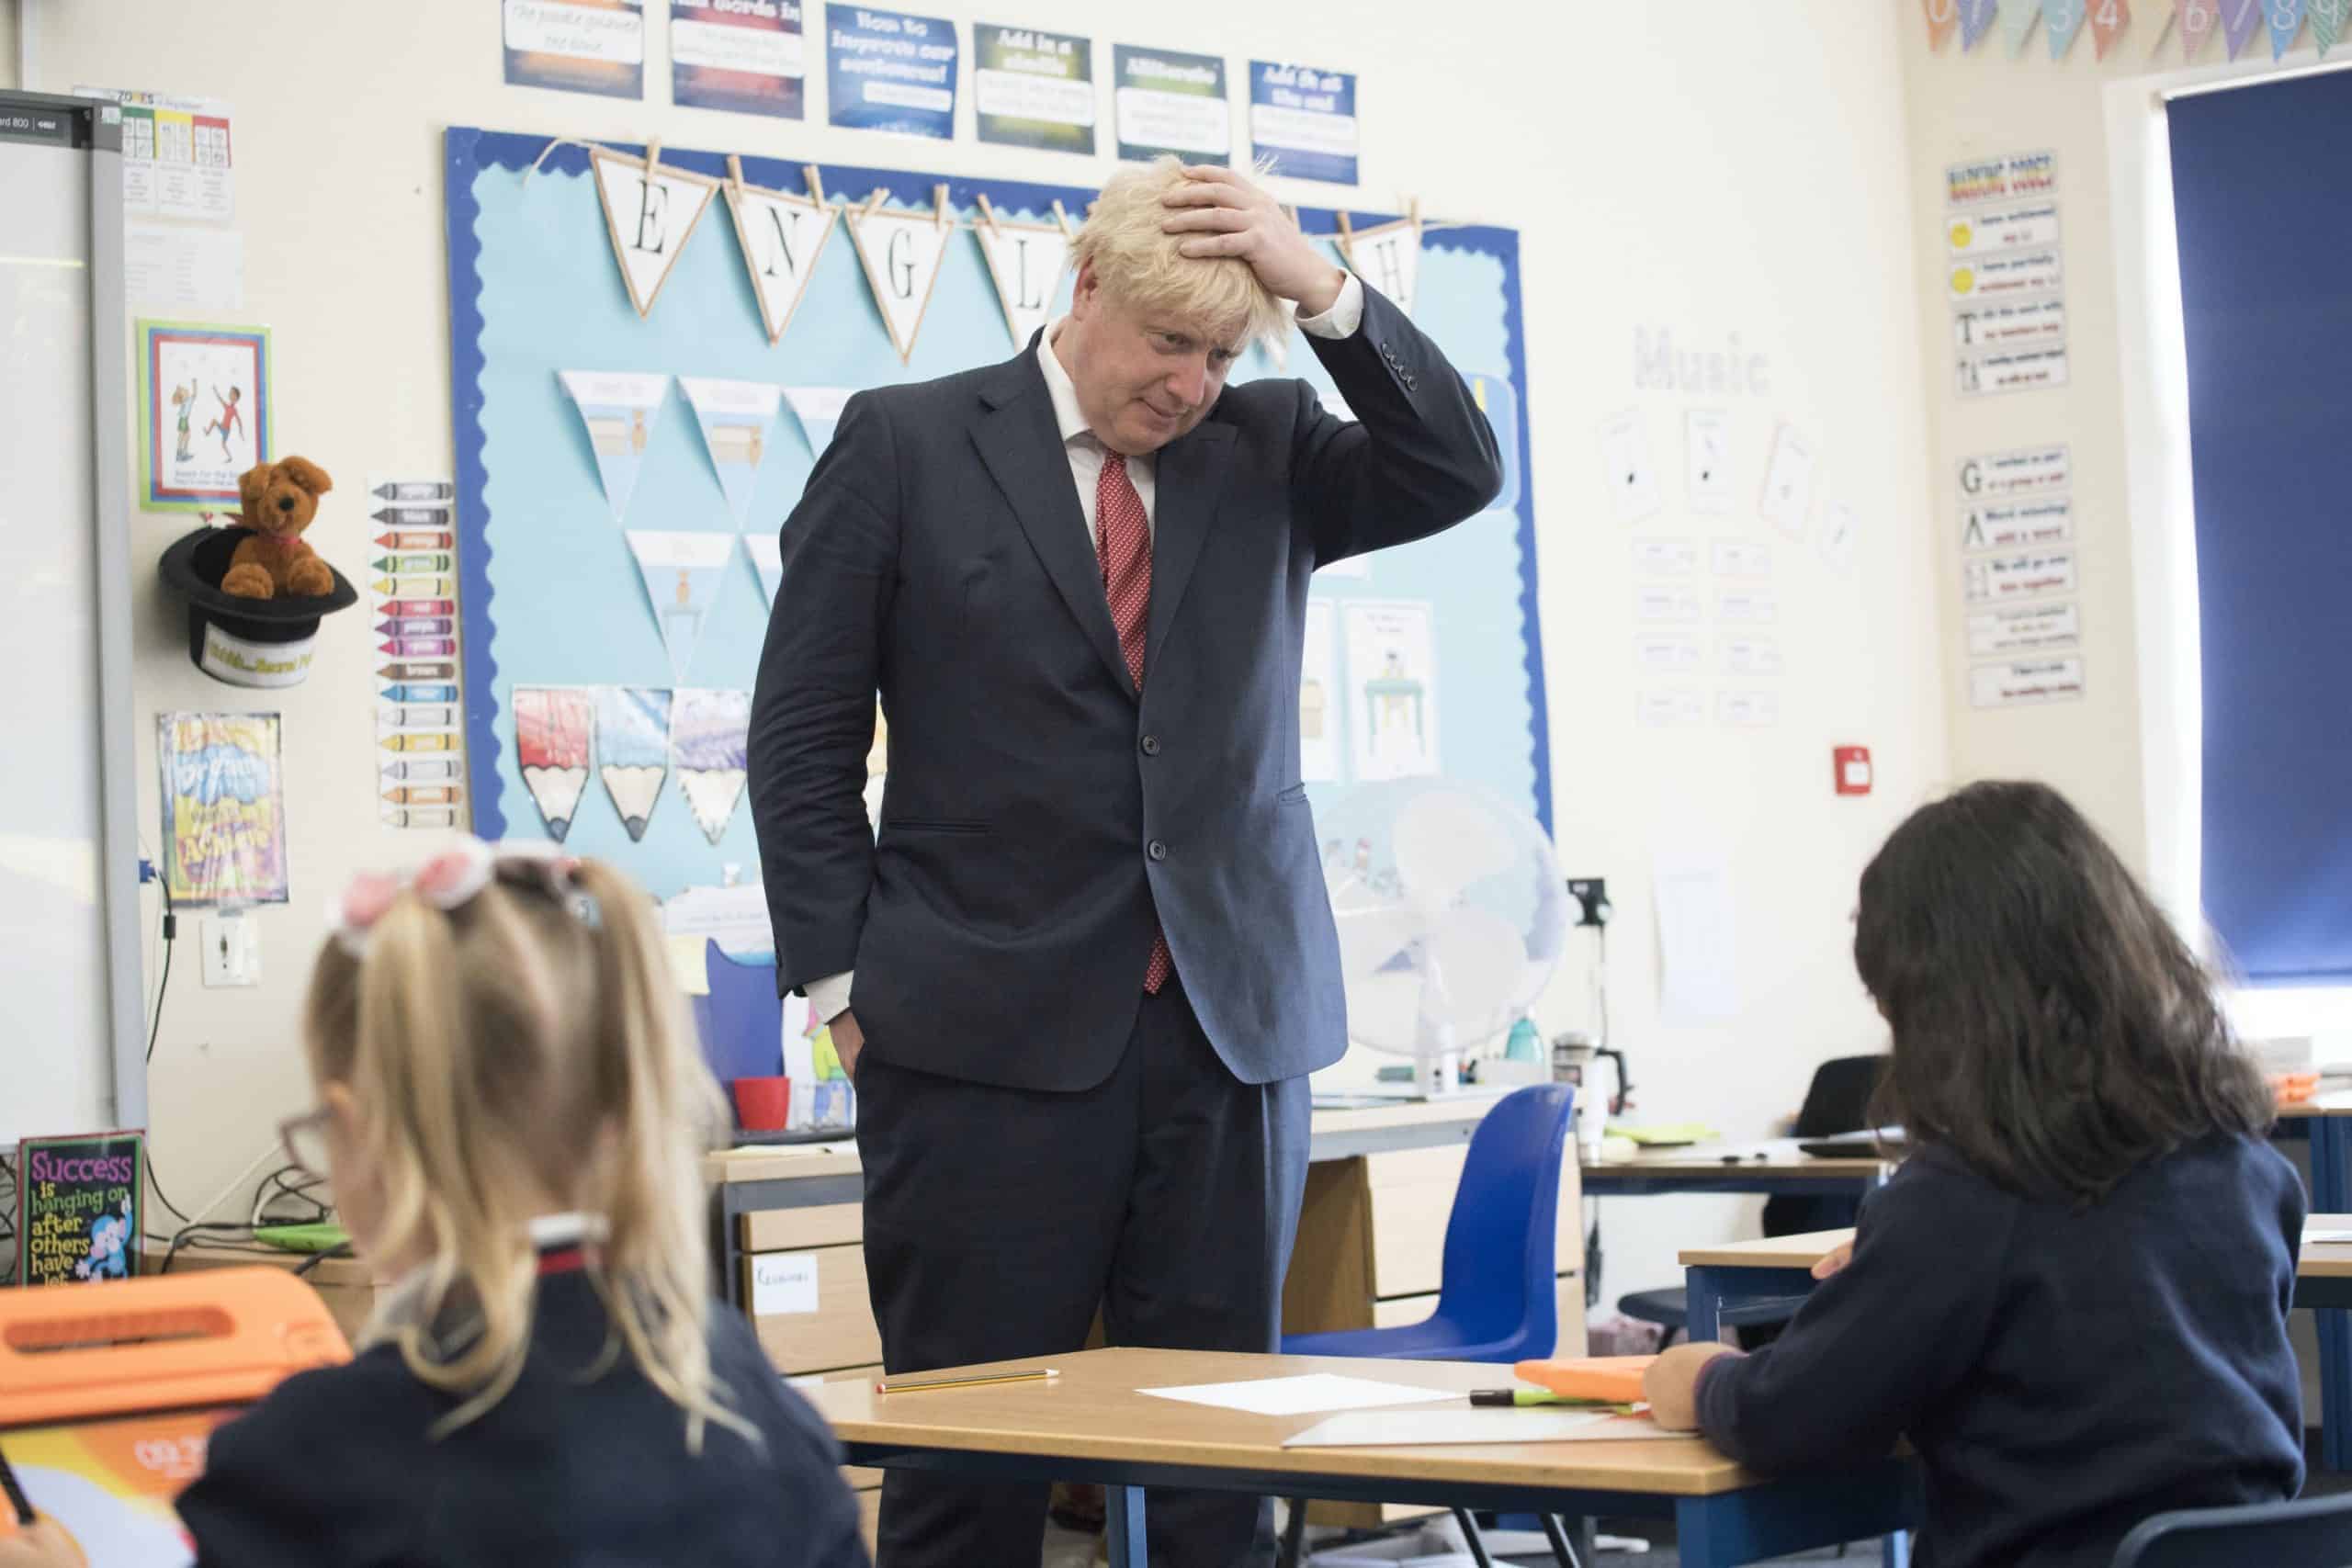 Staff member at school Boris Johnson visited tested positive for Covid-19